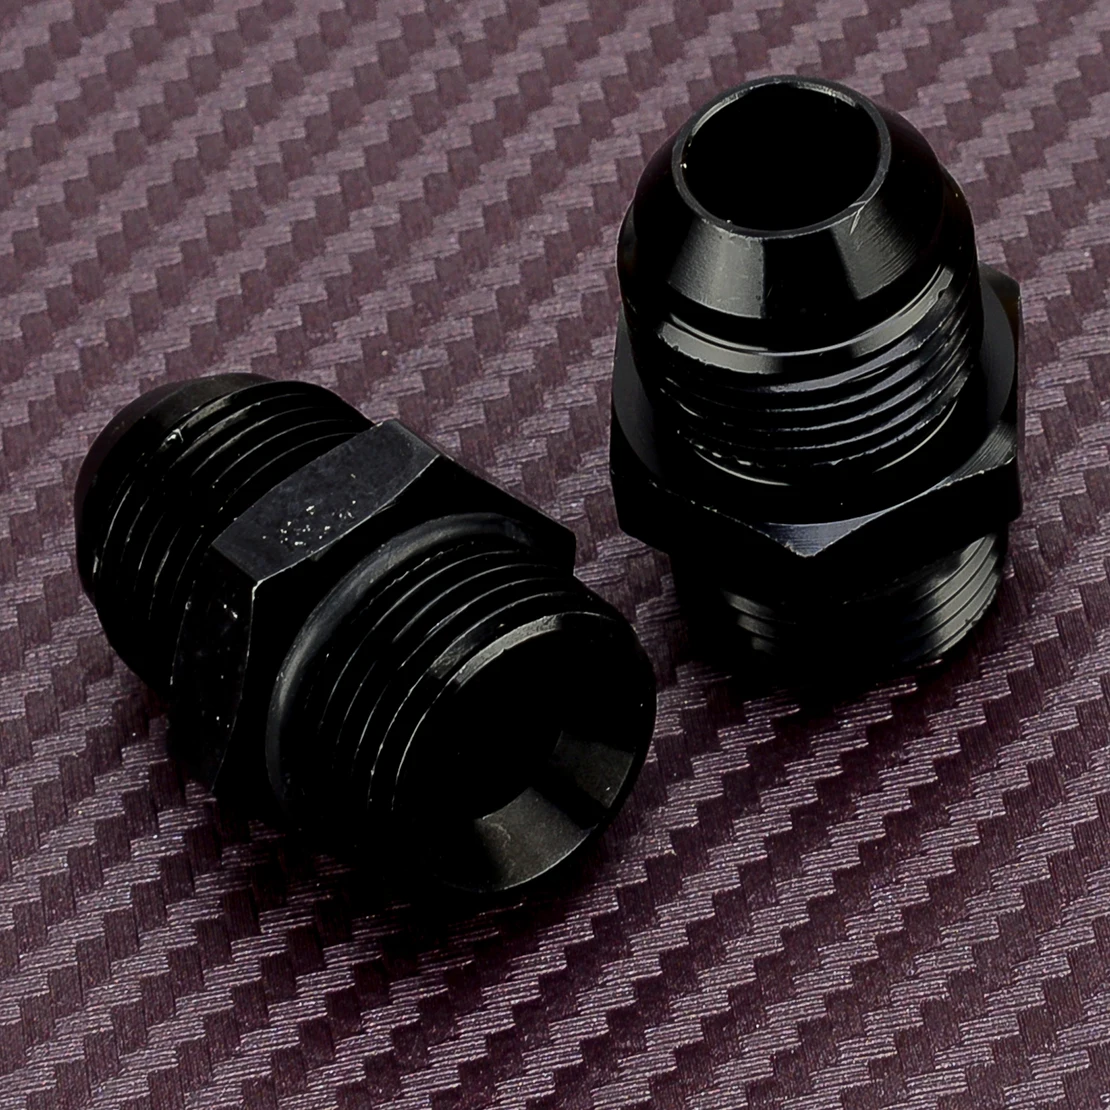 

Universal Aluminum Alloy 2Pcs ORB-8 O-Ring Boss 8AN to AN8 Male Adapter Fitting for Fuel Pump Rail Black